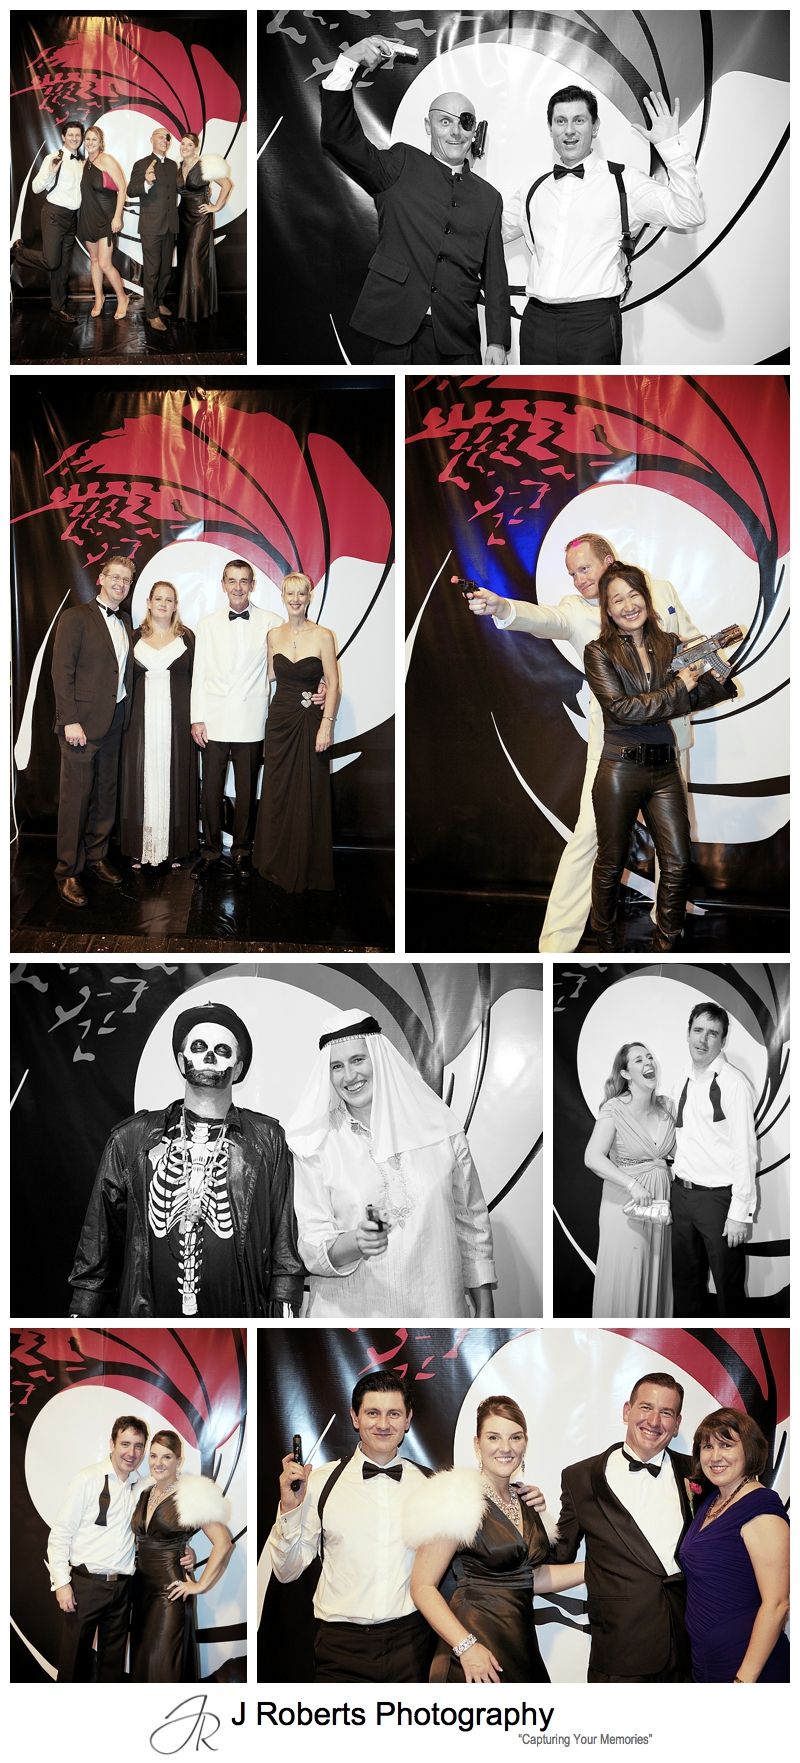 James bond theme photo booth at party - sydney party photography